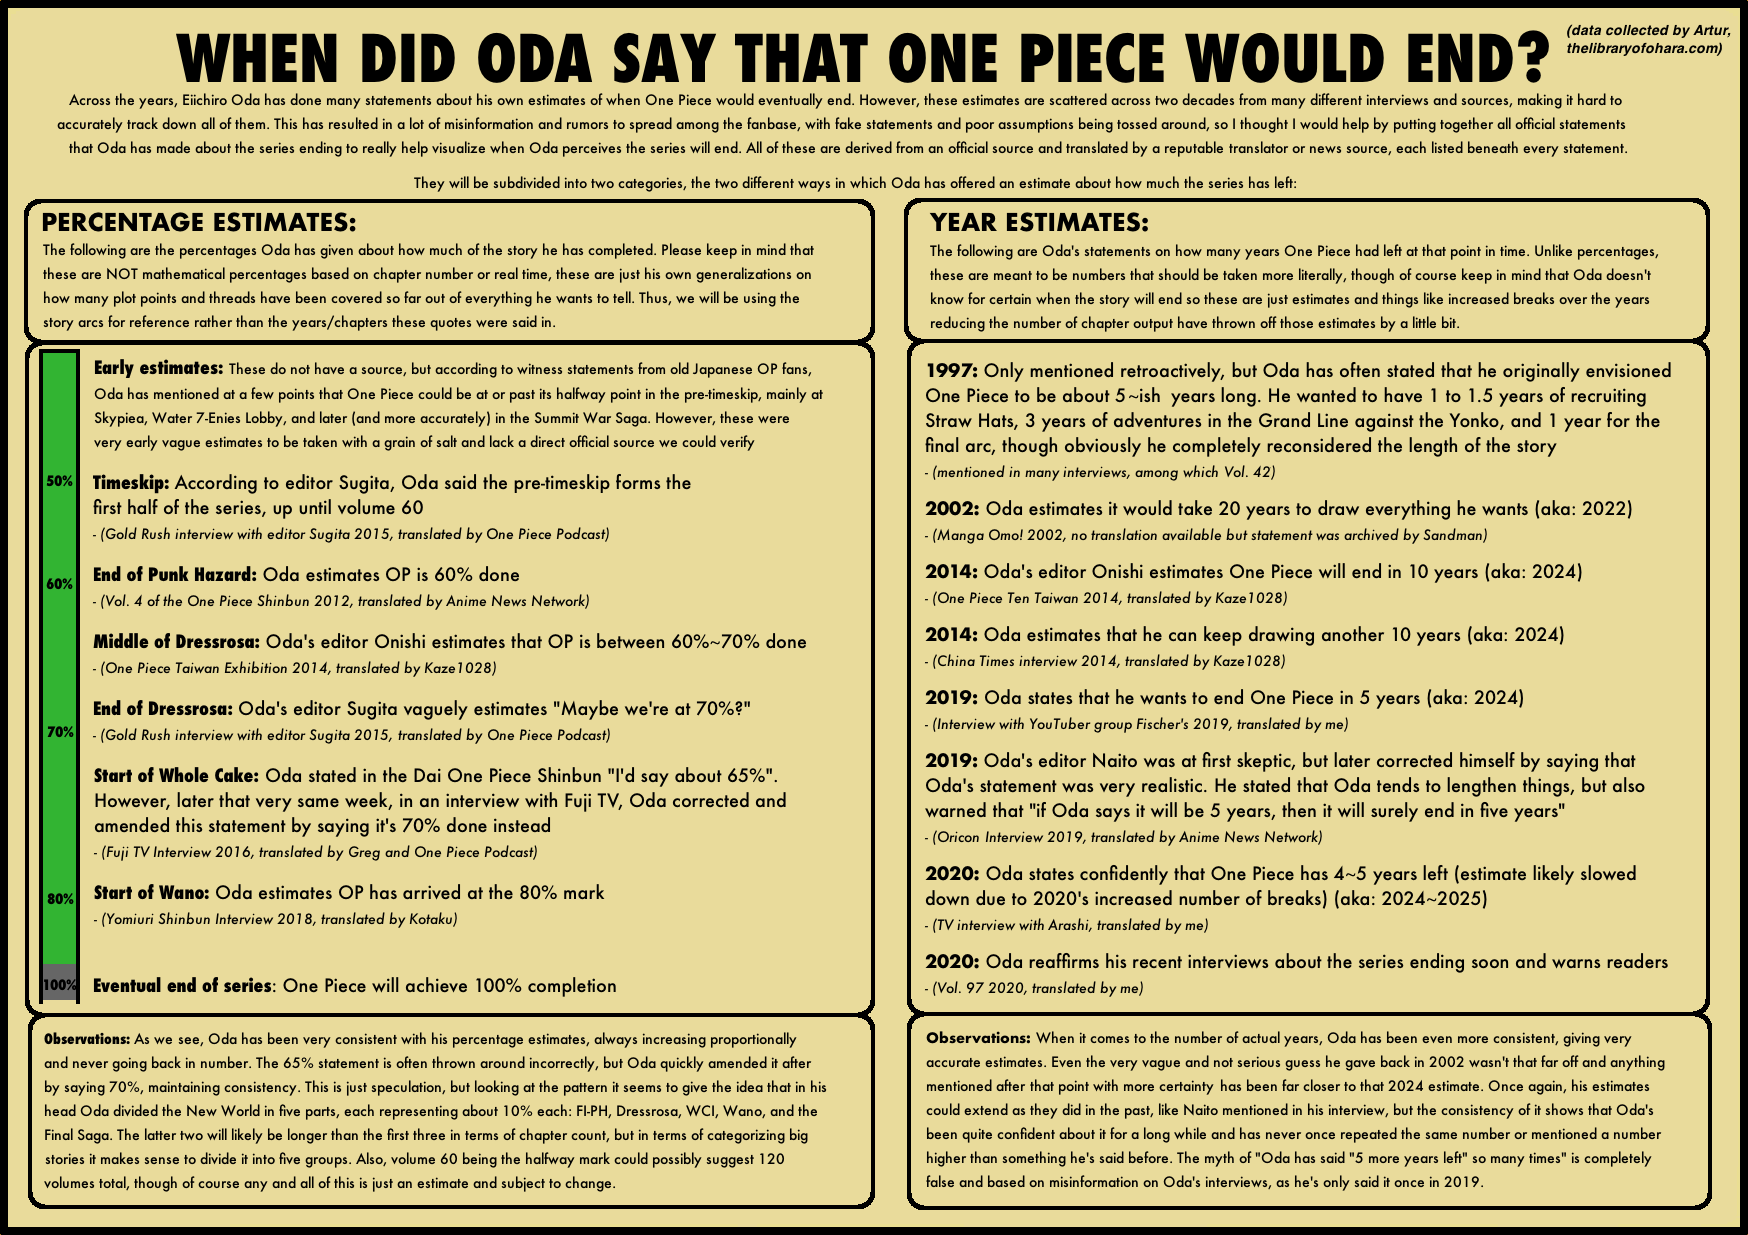 Artur Library Of Ohara Lots Of Misinformation Often Floats Around When An Estimate For The End Is Given Spreading False Rumors Like Oda Always Says 5 Years Or Oda